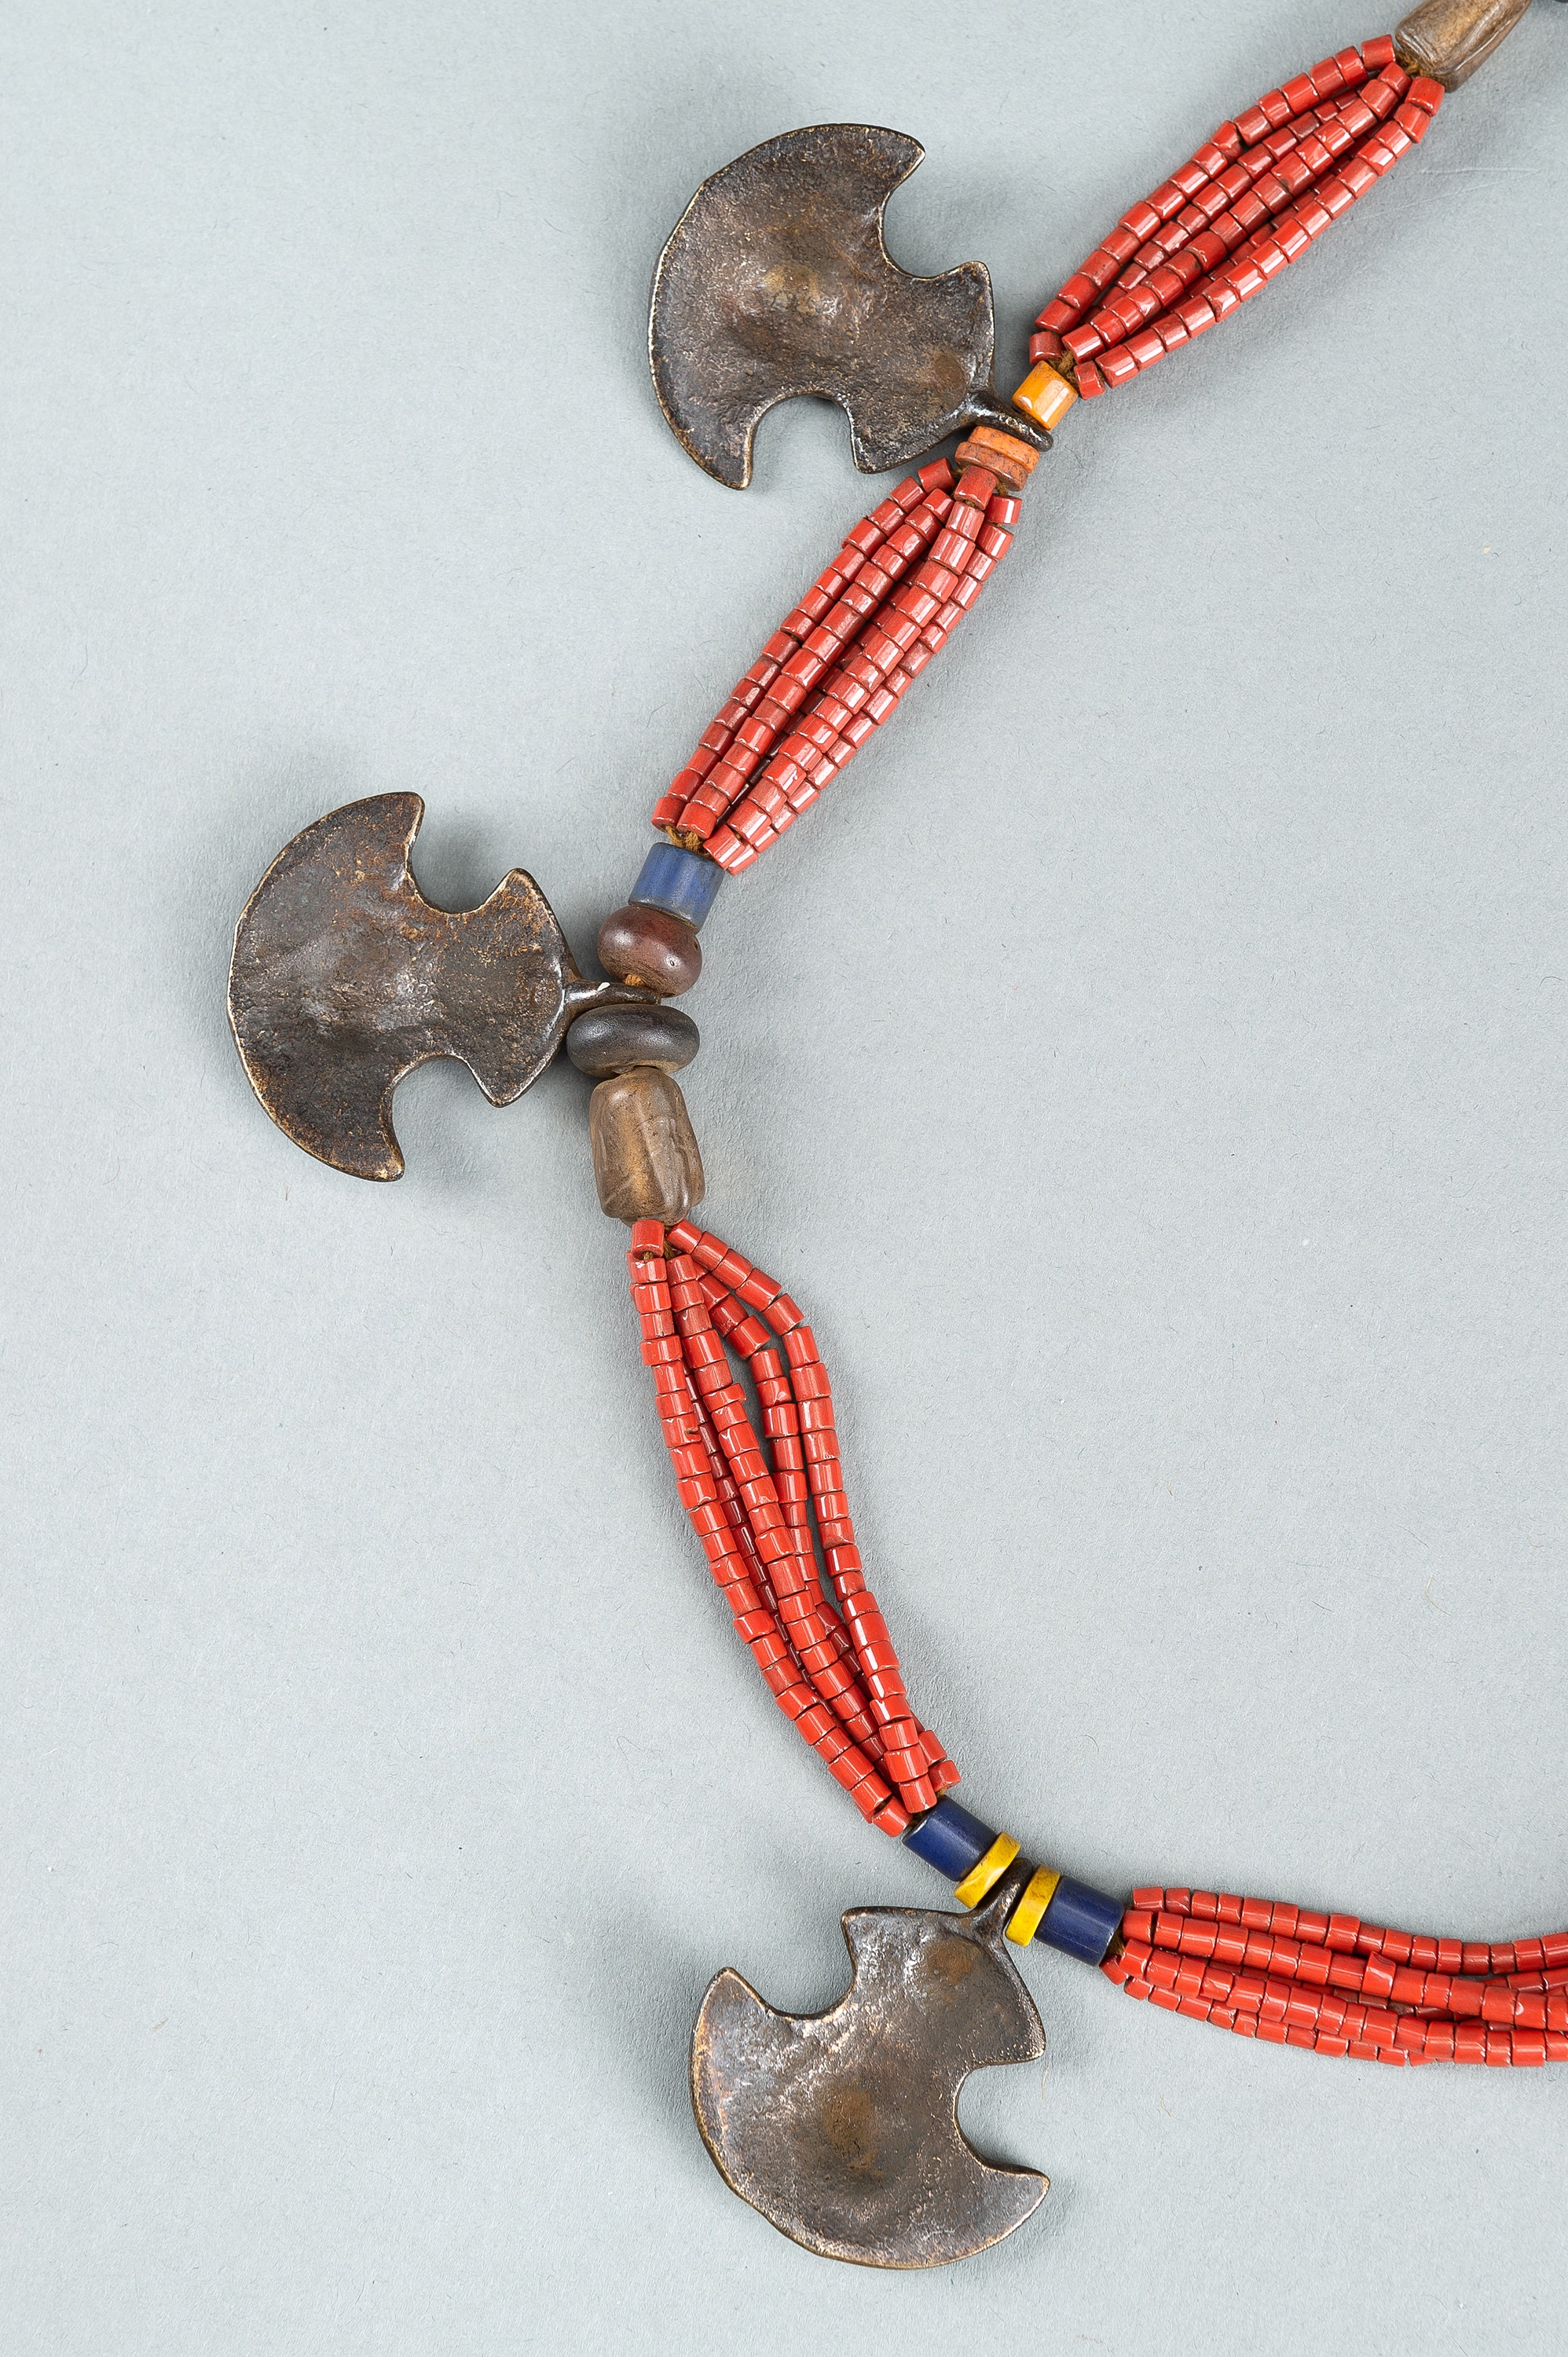 A NAGALAND MULTI-COLORED GLASS AND BRASS NECKLACE, c. 1900s - Image 9 of 11